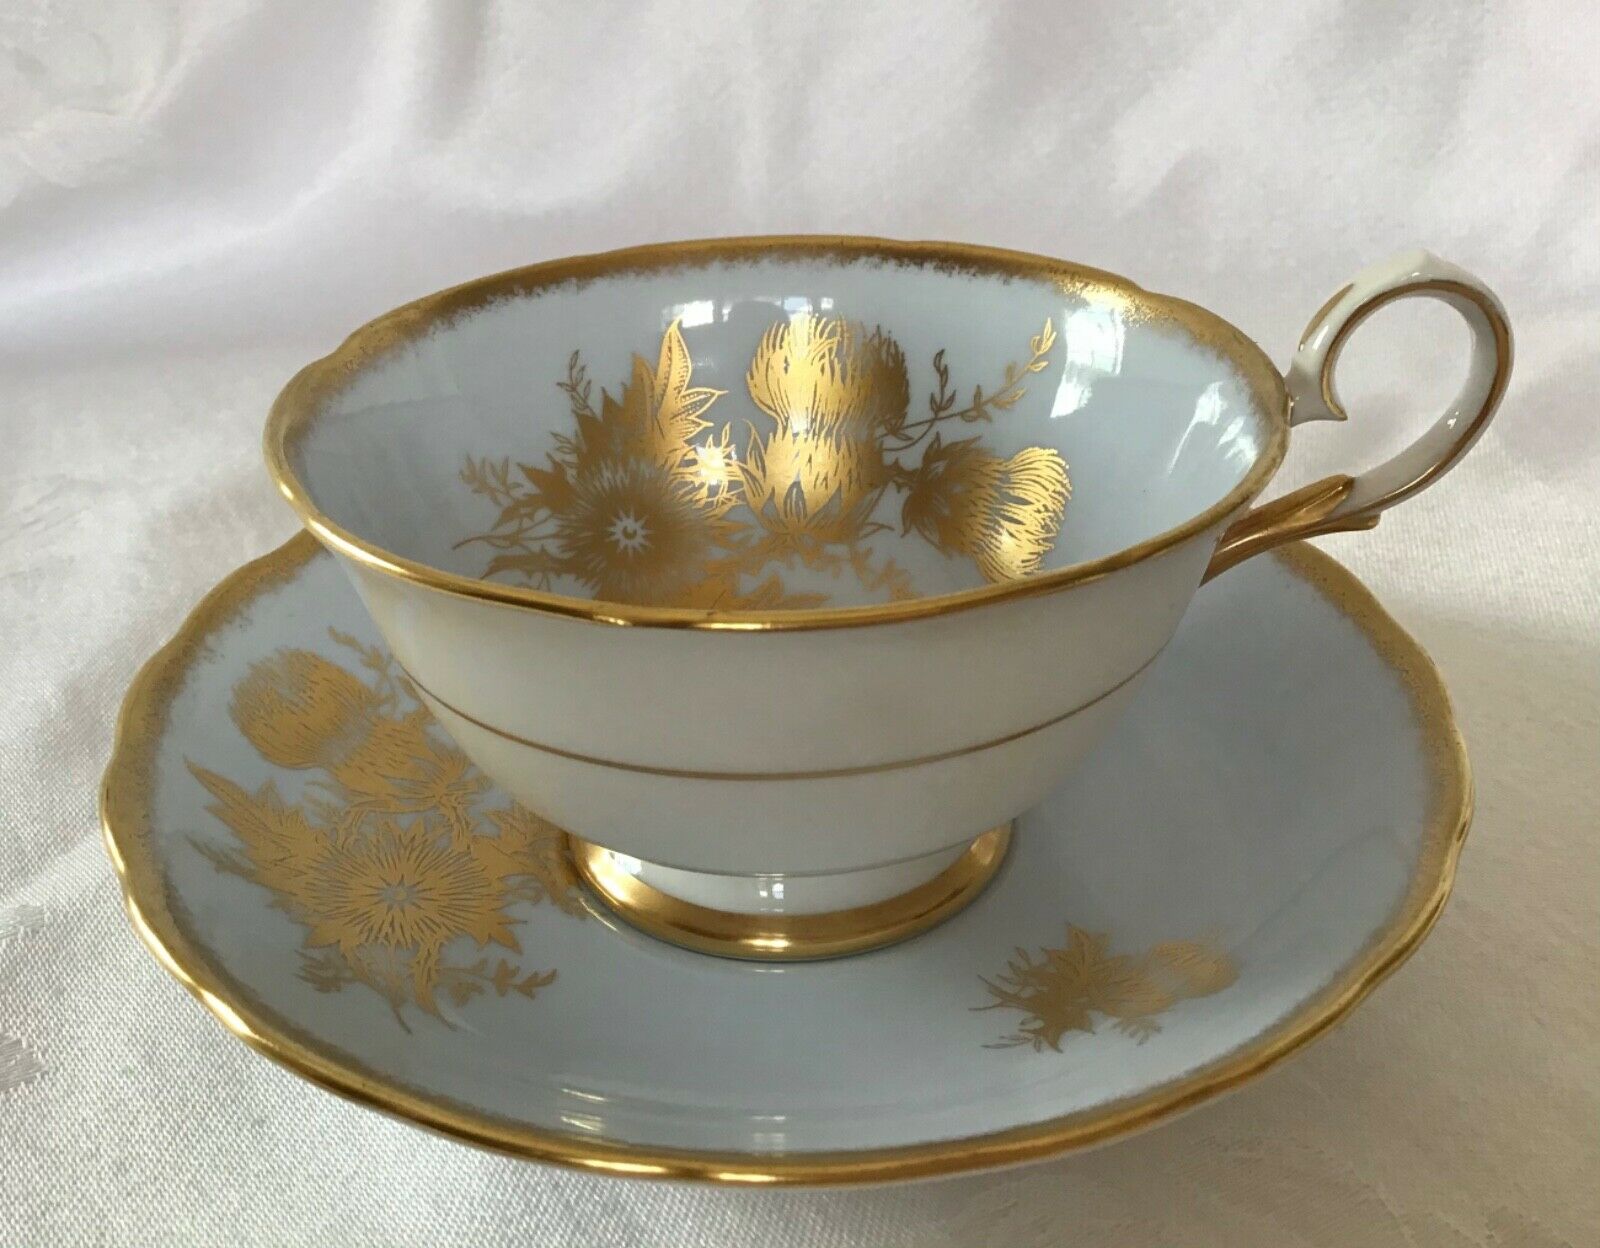 Tuscan Fine Bone China Tea Cup And Saucer, Pale Blue With Gold Thistle